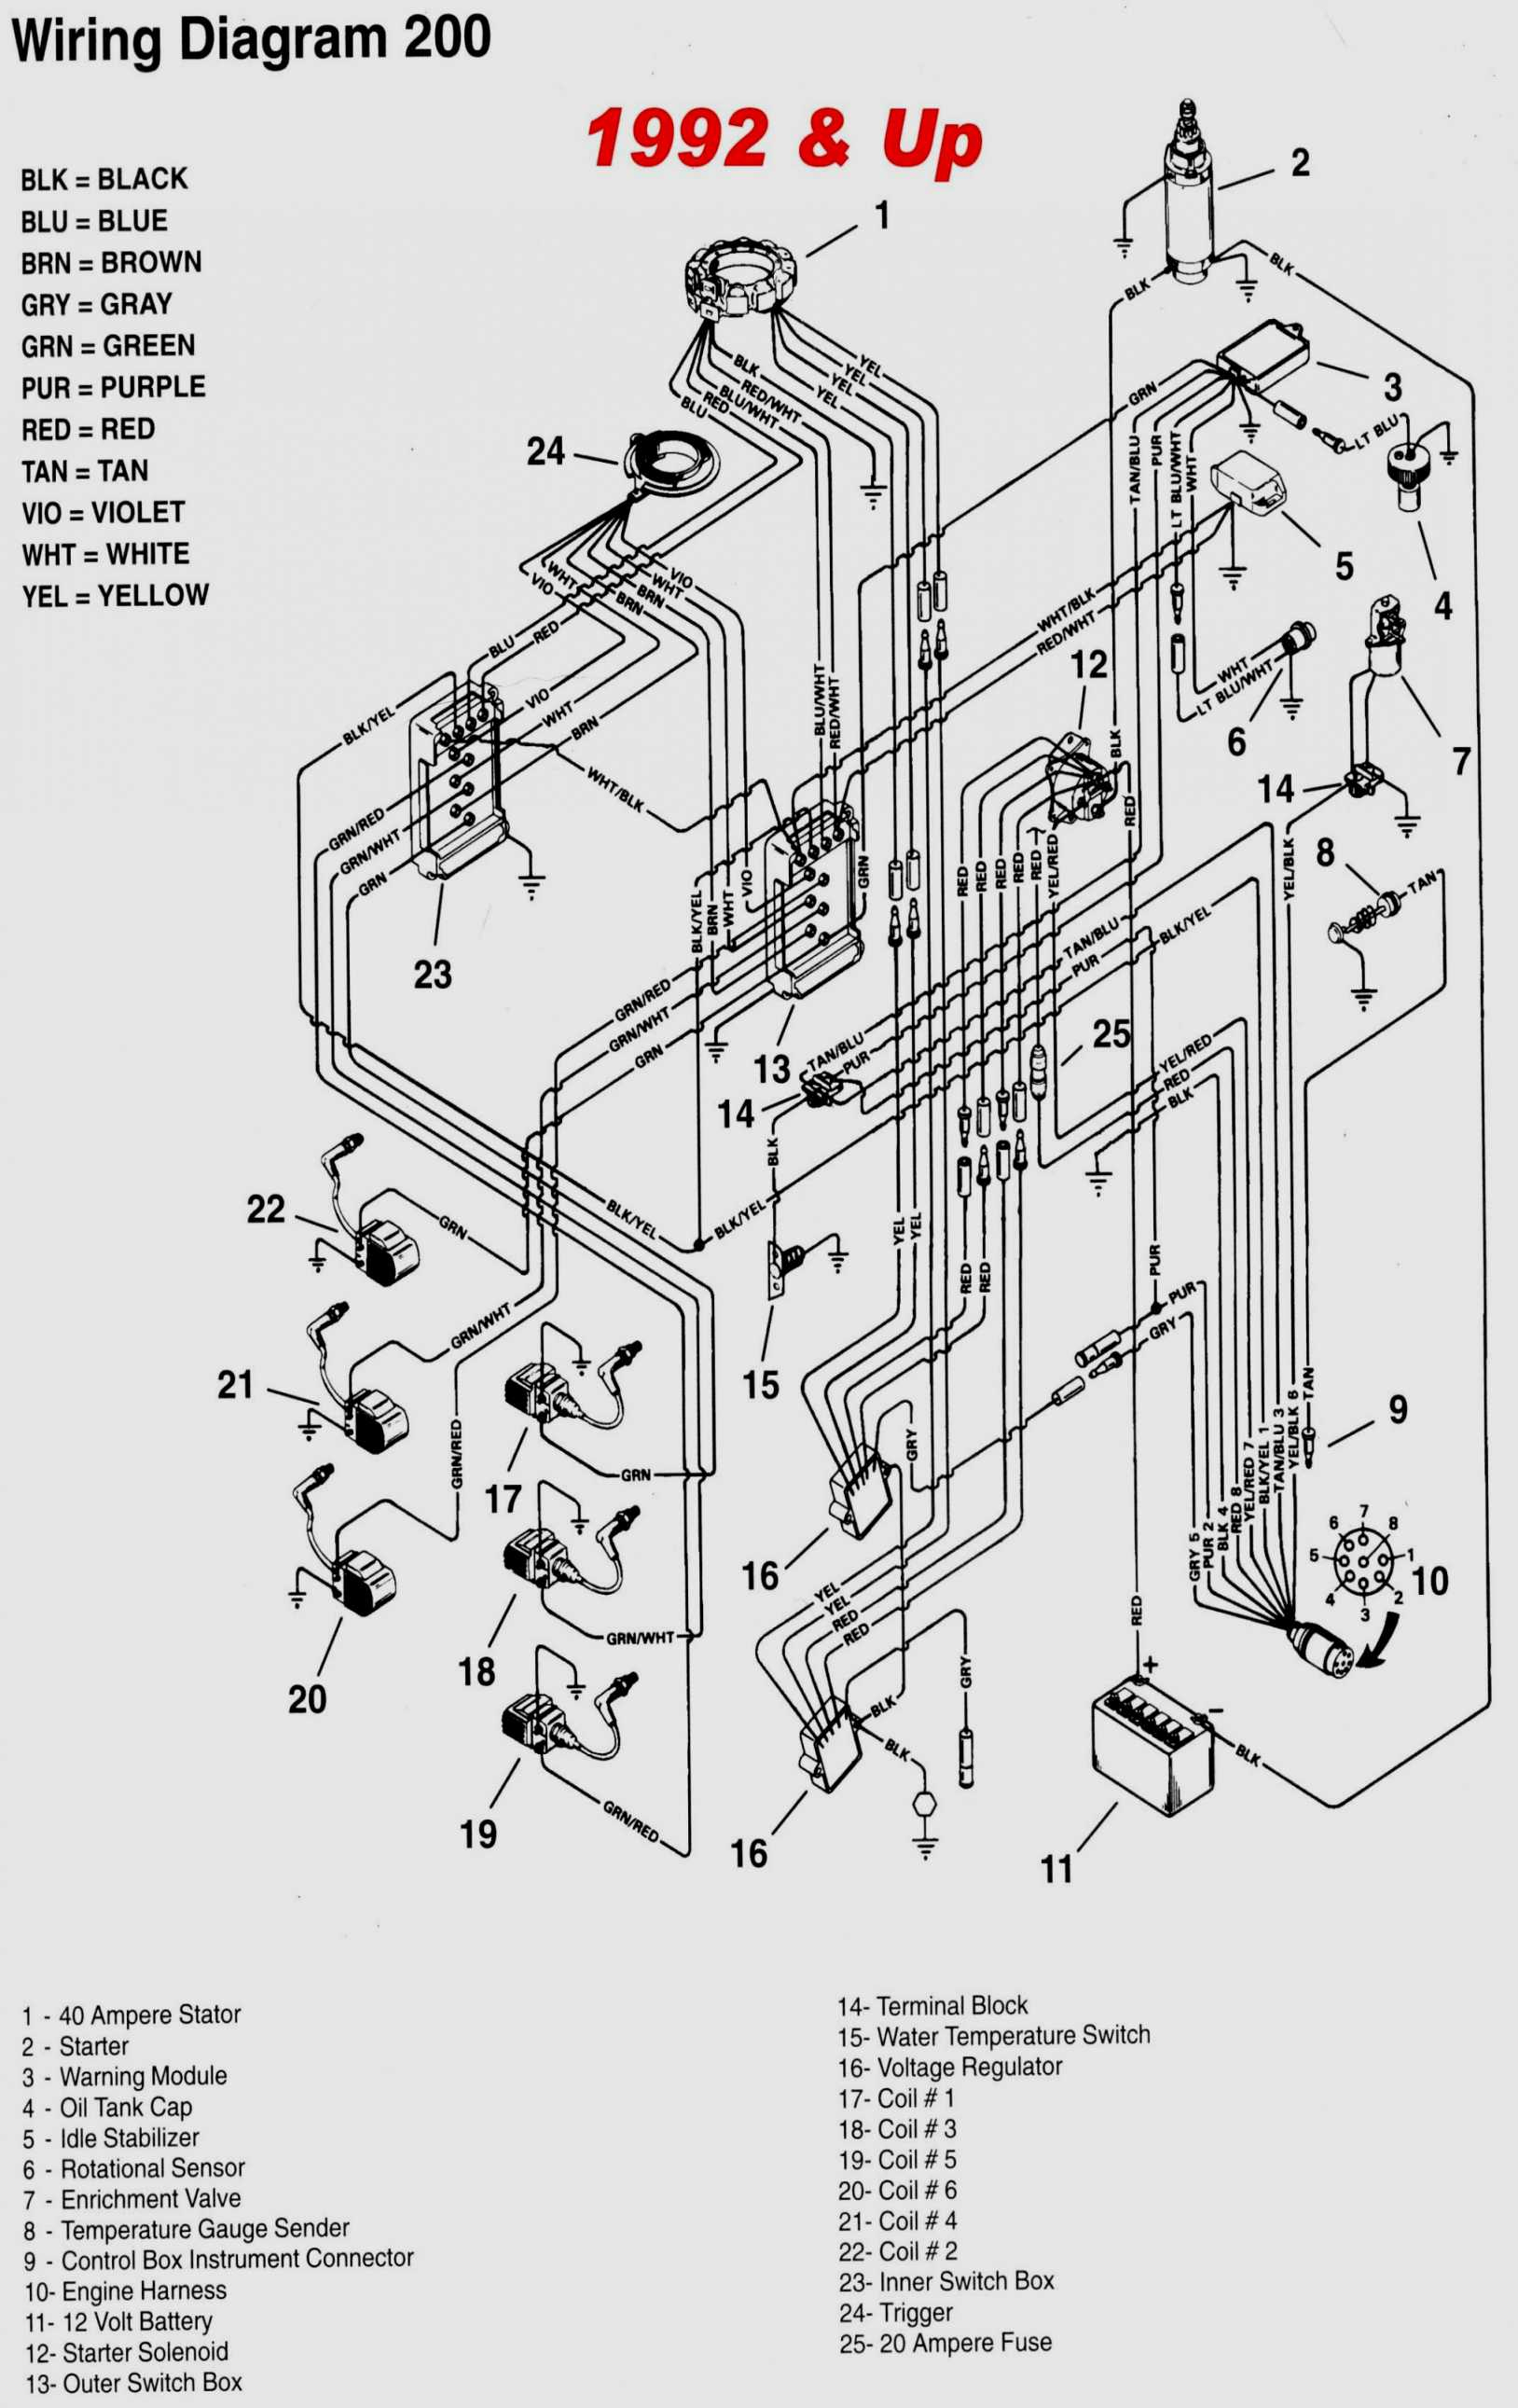 1987 50 Hp Johnson Wiring Diagram | Wiring Library - Johnson Outboard Wiring Diagram Pdf